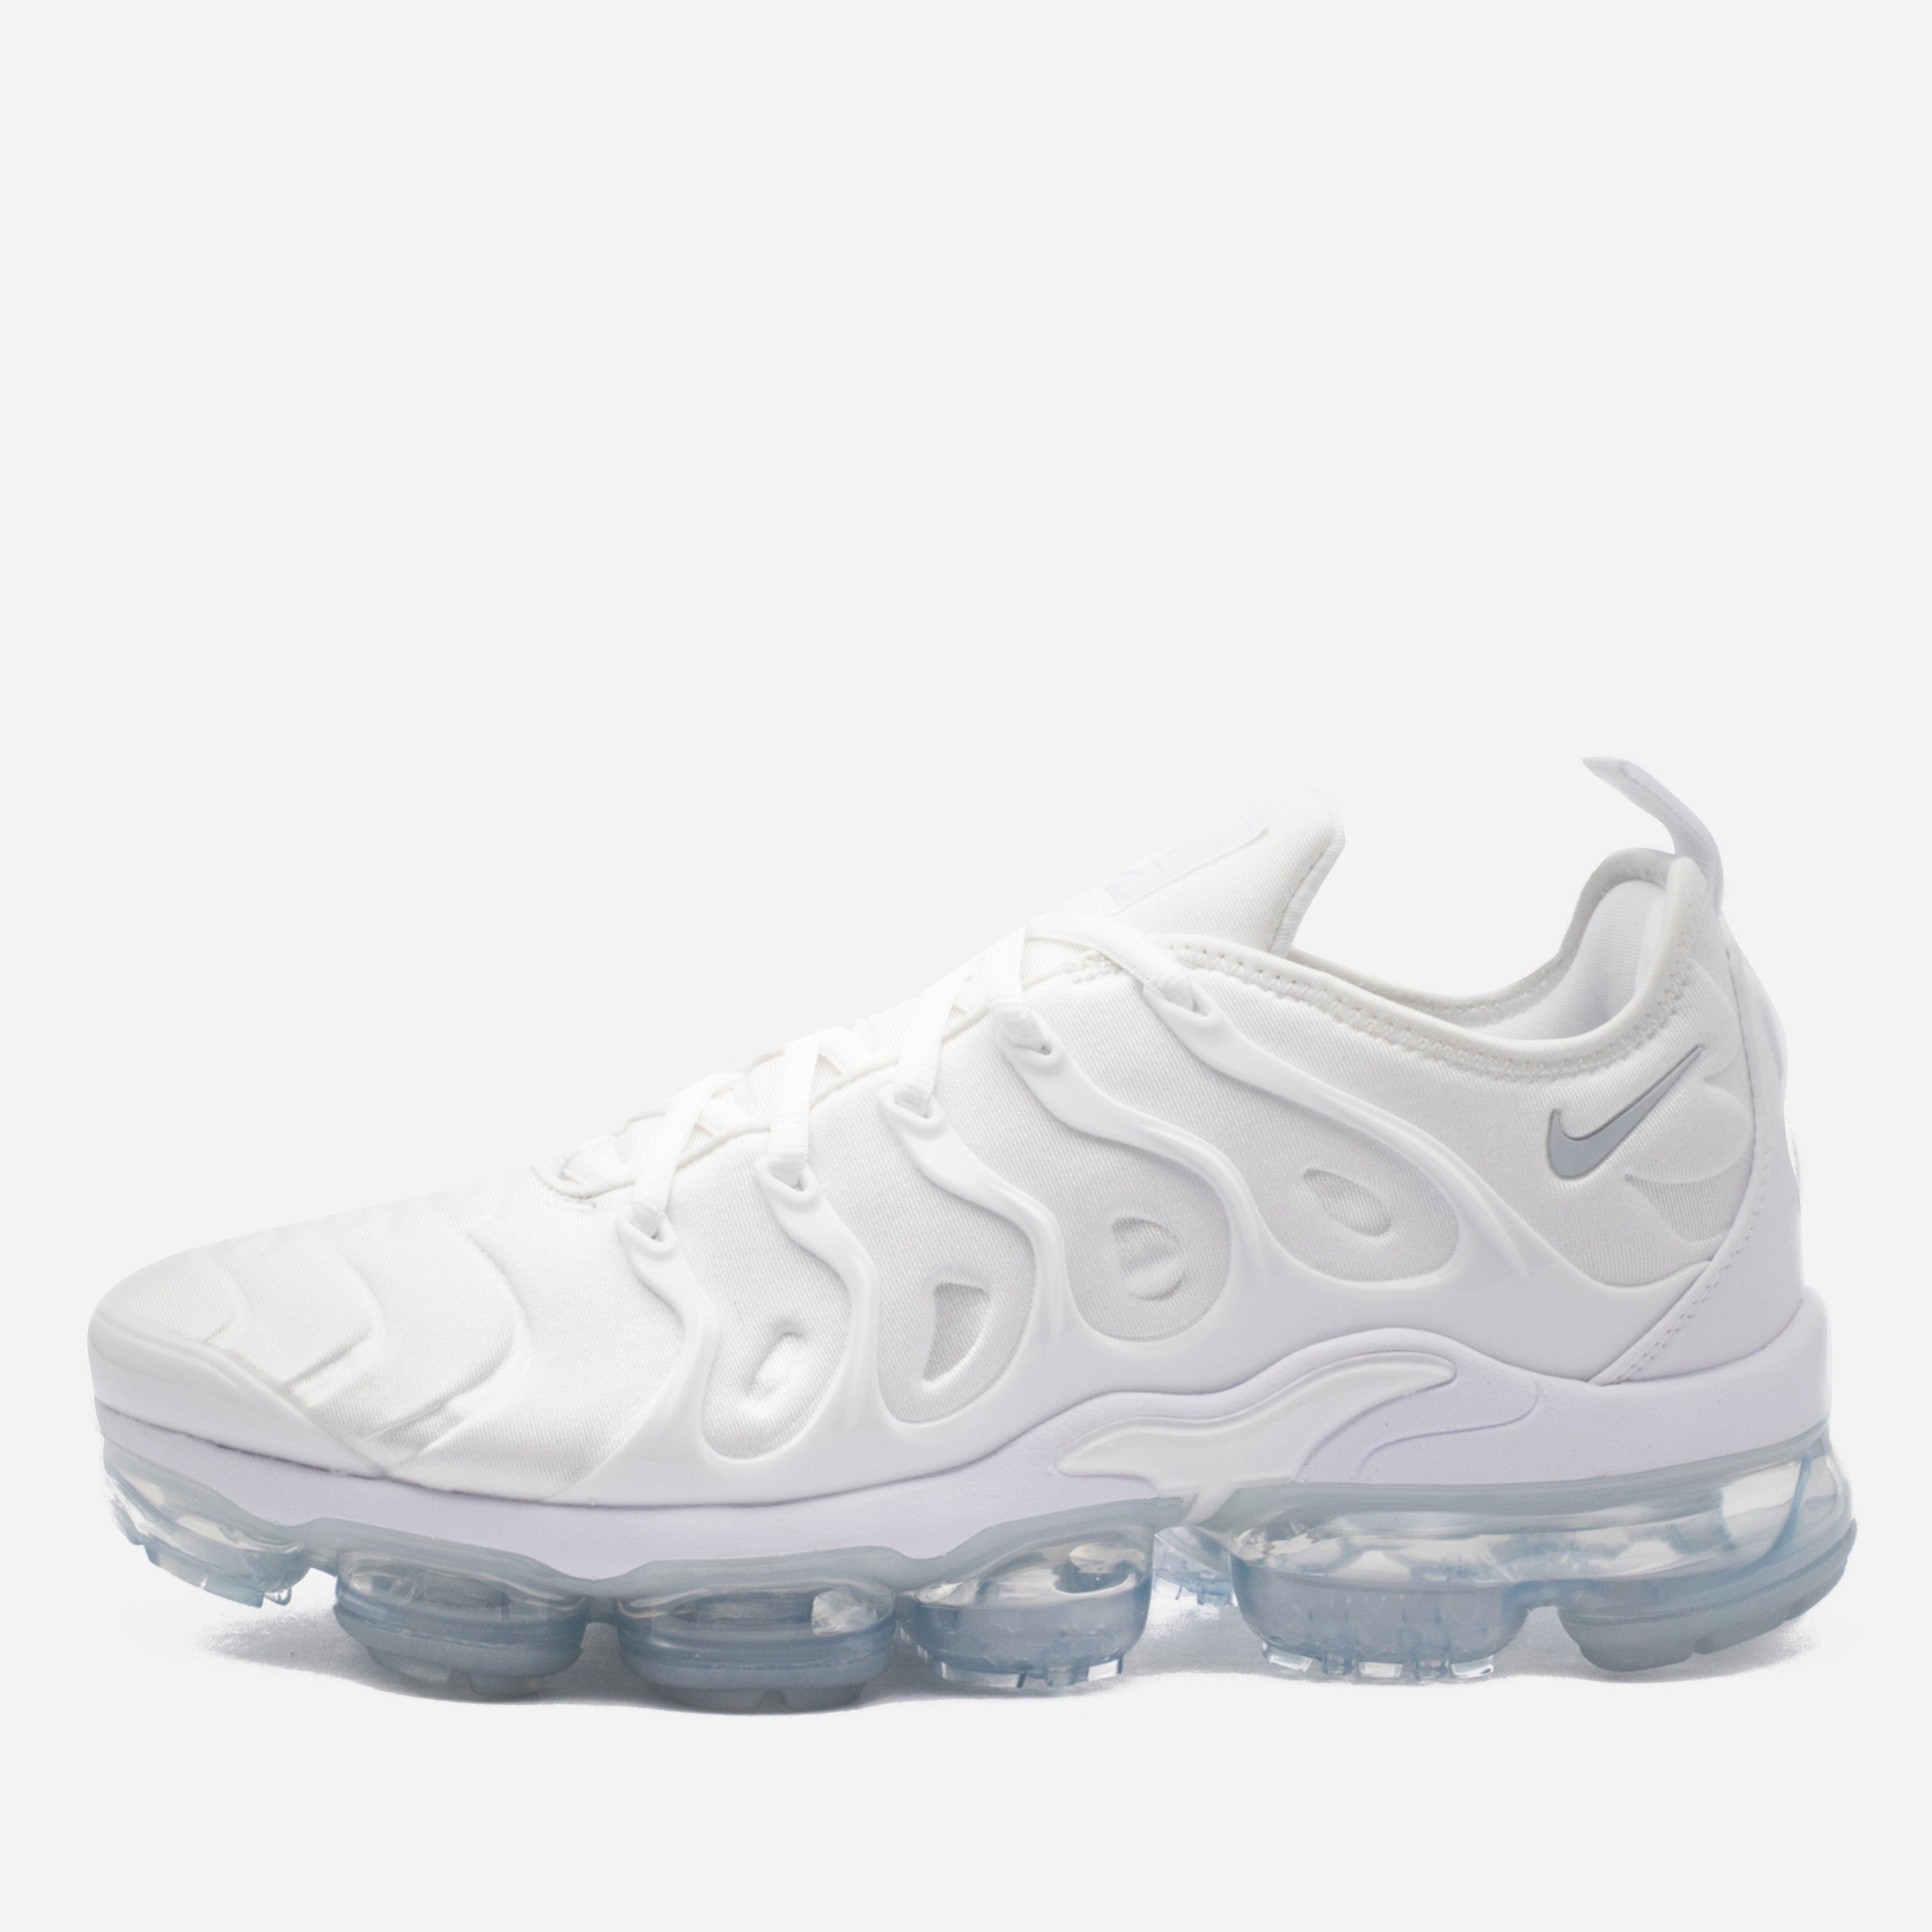 Nike Air Vapormax Plus Shoes - Size 8 in White for Men - Save 15% - Lyst